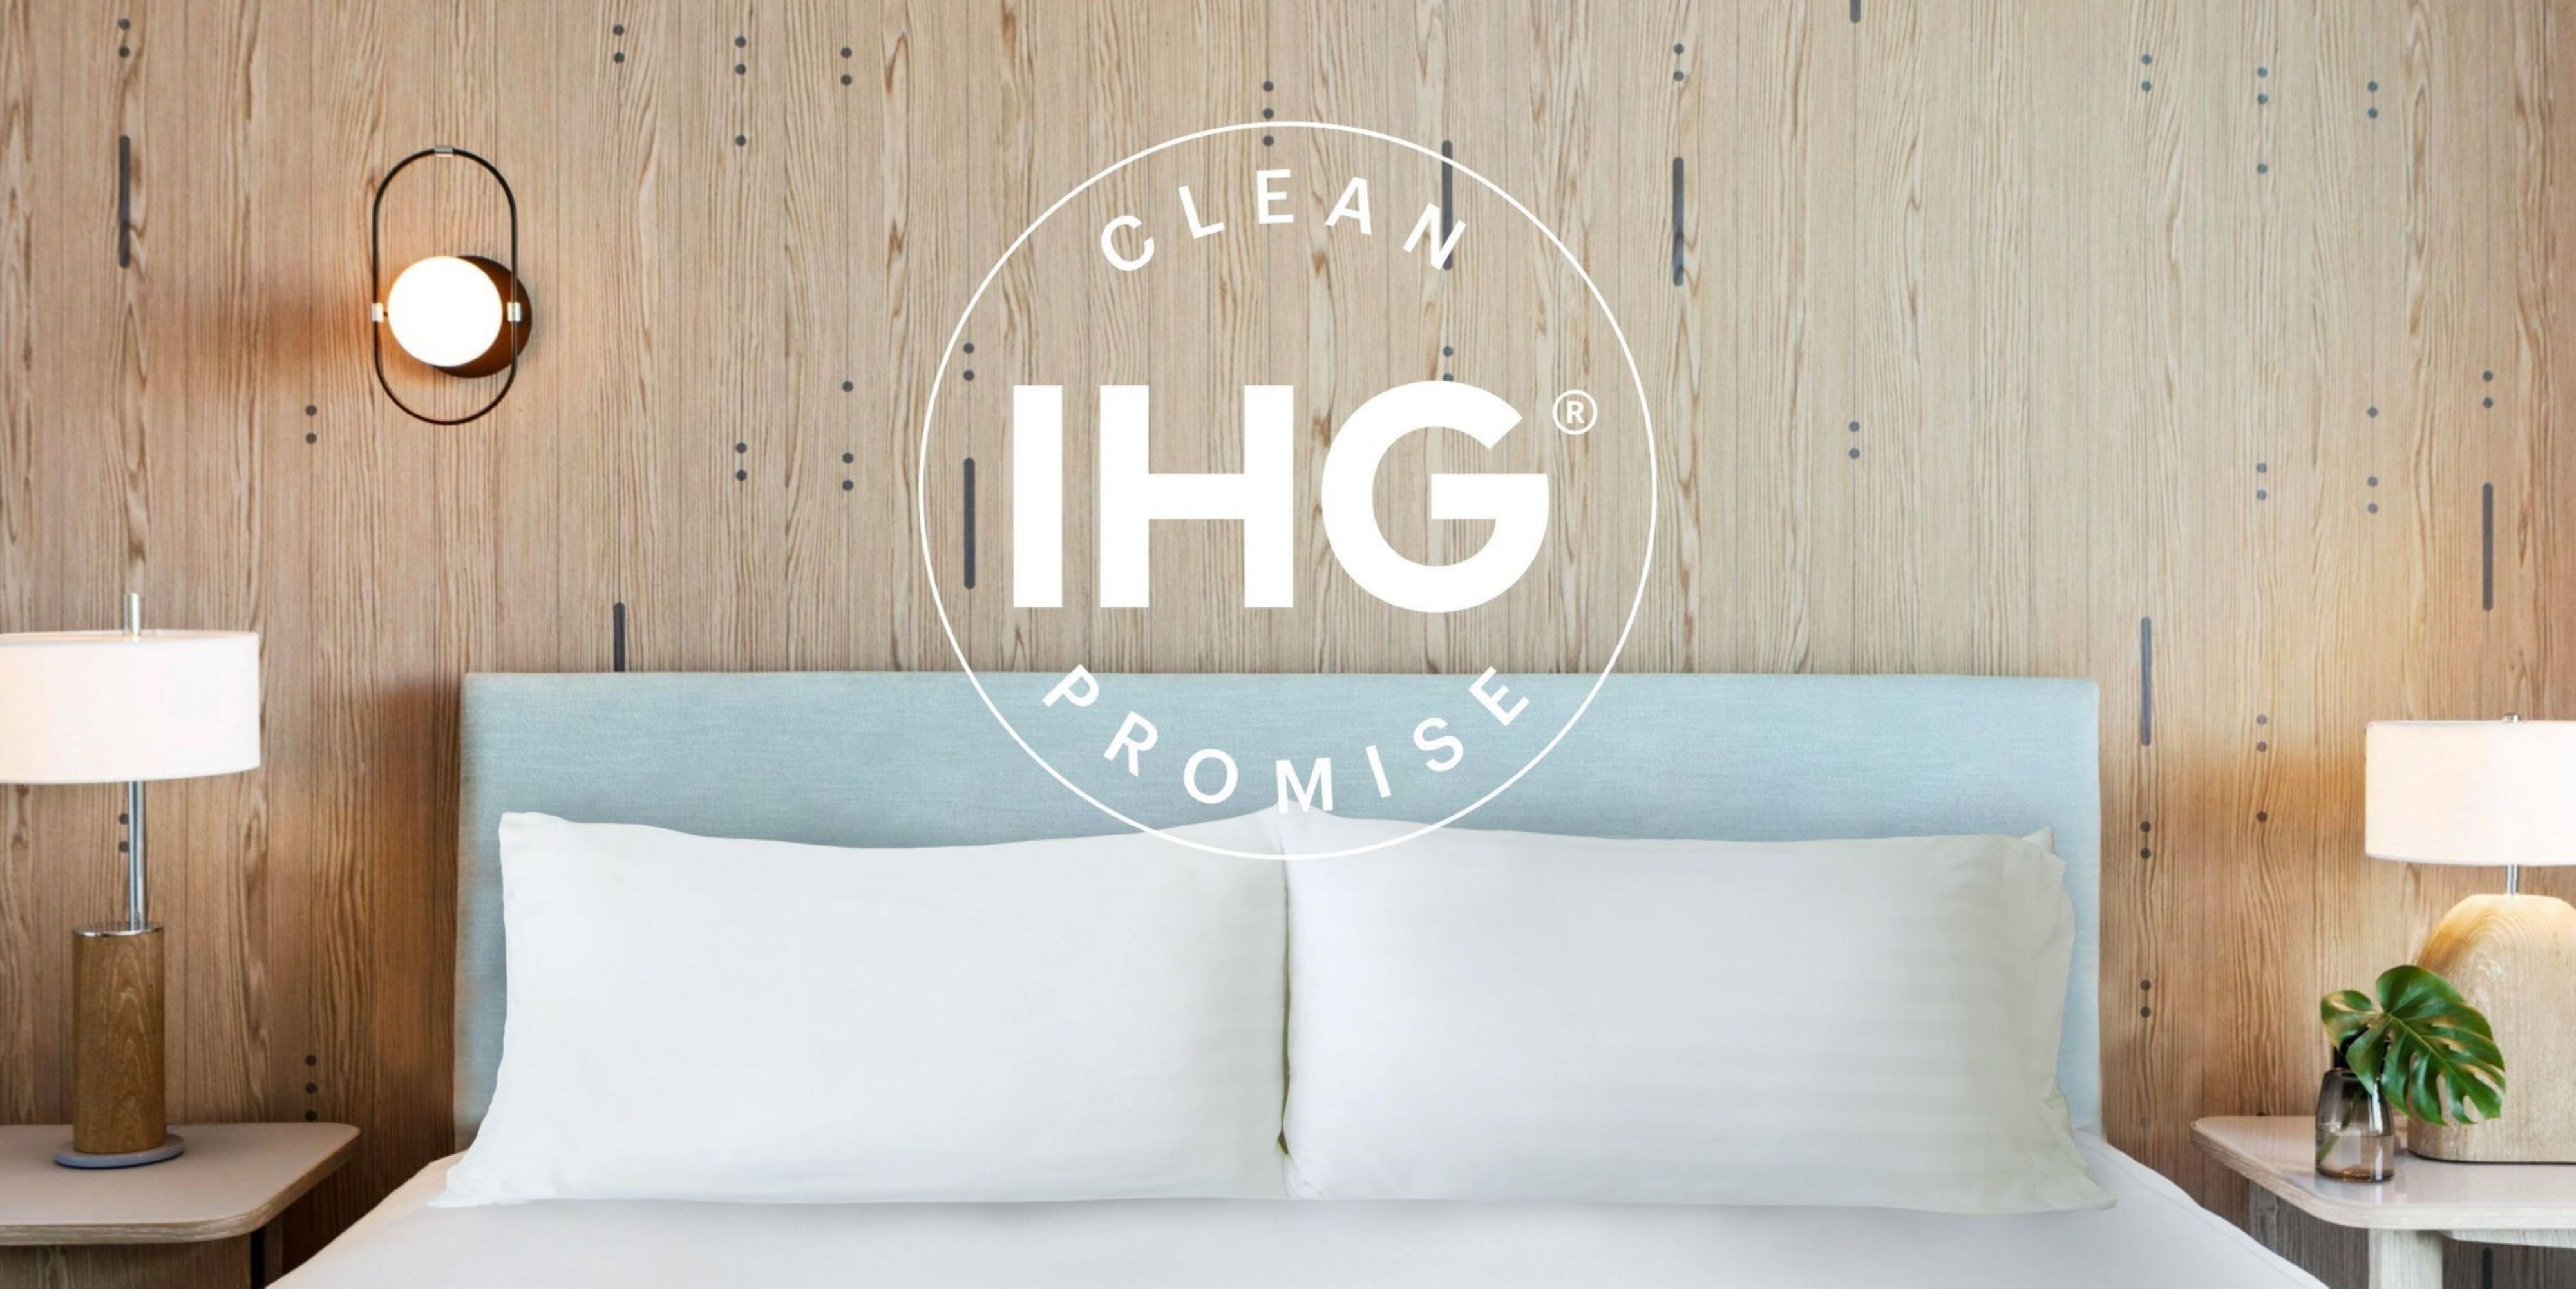 As the world adjusts to new travel norms and expectations, IHG® Hotels & Resorts is enhancing the experience for its hotel guests around the world, by redefining cleanliness and supporting guests’ personal wellbeing throughout their stay. Our hotel is committed to delivering on this promise and confident you will notice the difference!
